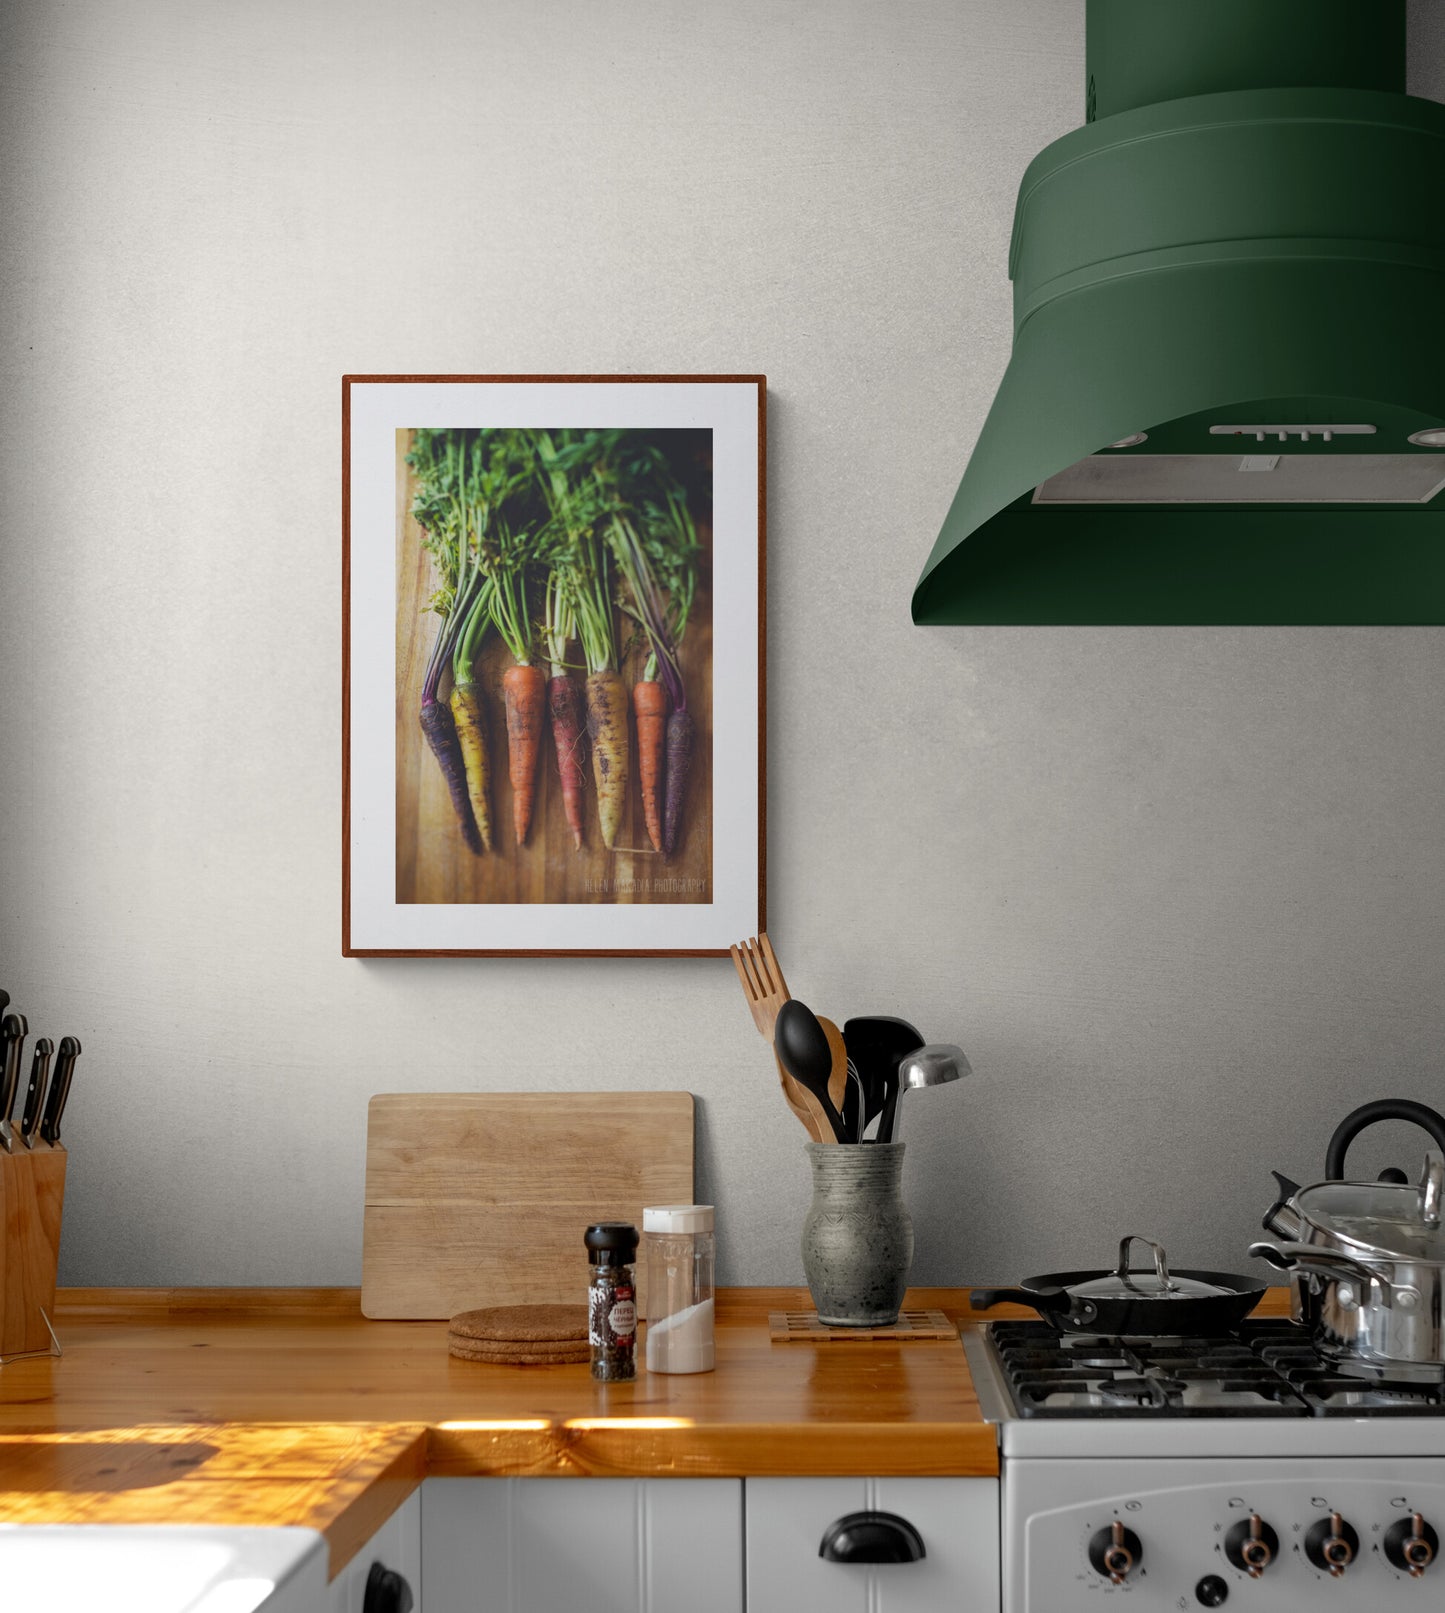 Colorful carrots photograph as kitchen wall art in a farmhouse kitchen